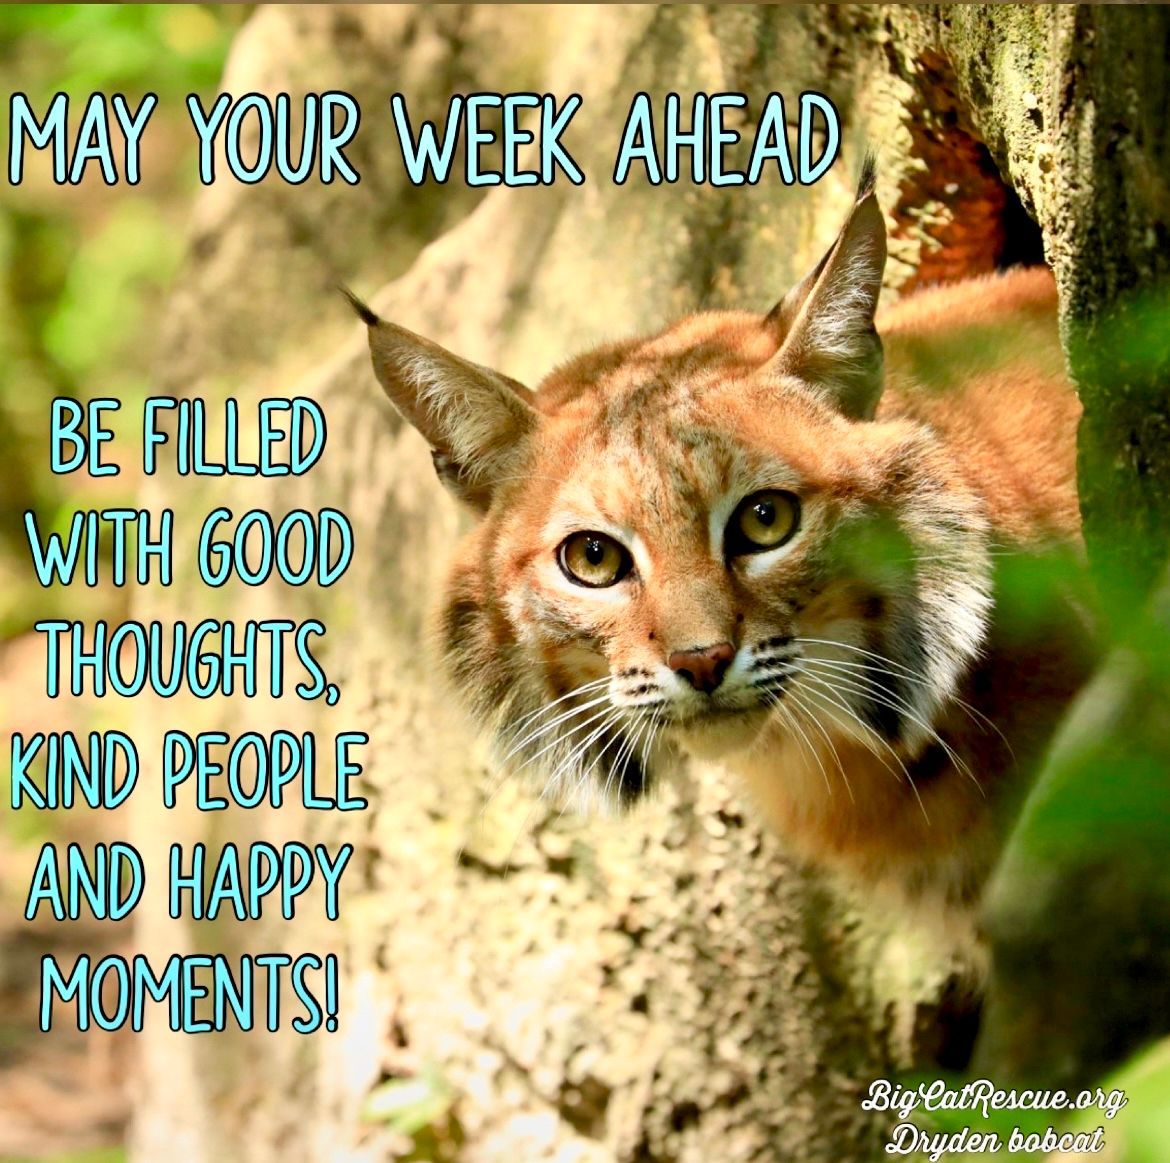 “May your week ahead be filled with good thoughts, kind people and happy moments!”

#DrydenBobcat #BigCatRescue #BigCats #Rescue #Bobcat #QuotesToLiveBy #Inspiration #Kindness #Happy #Thoughts #Conservation #Wildlife #CaroleBaskin